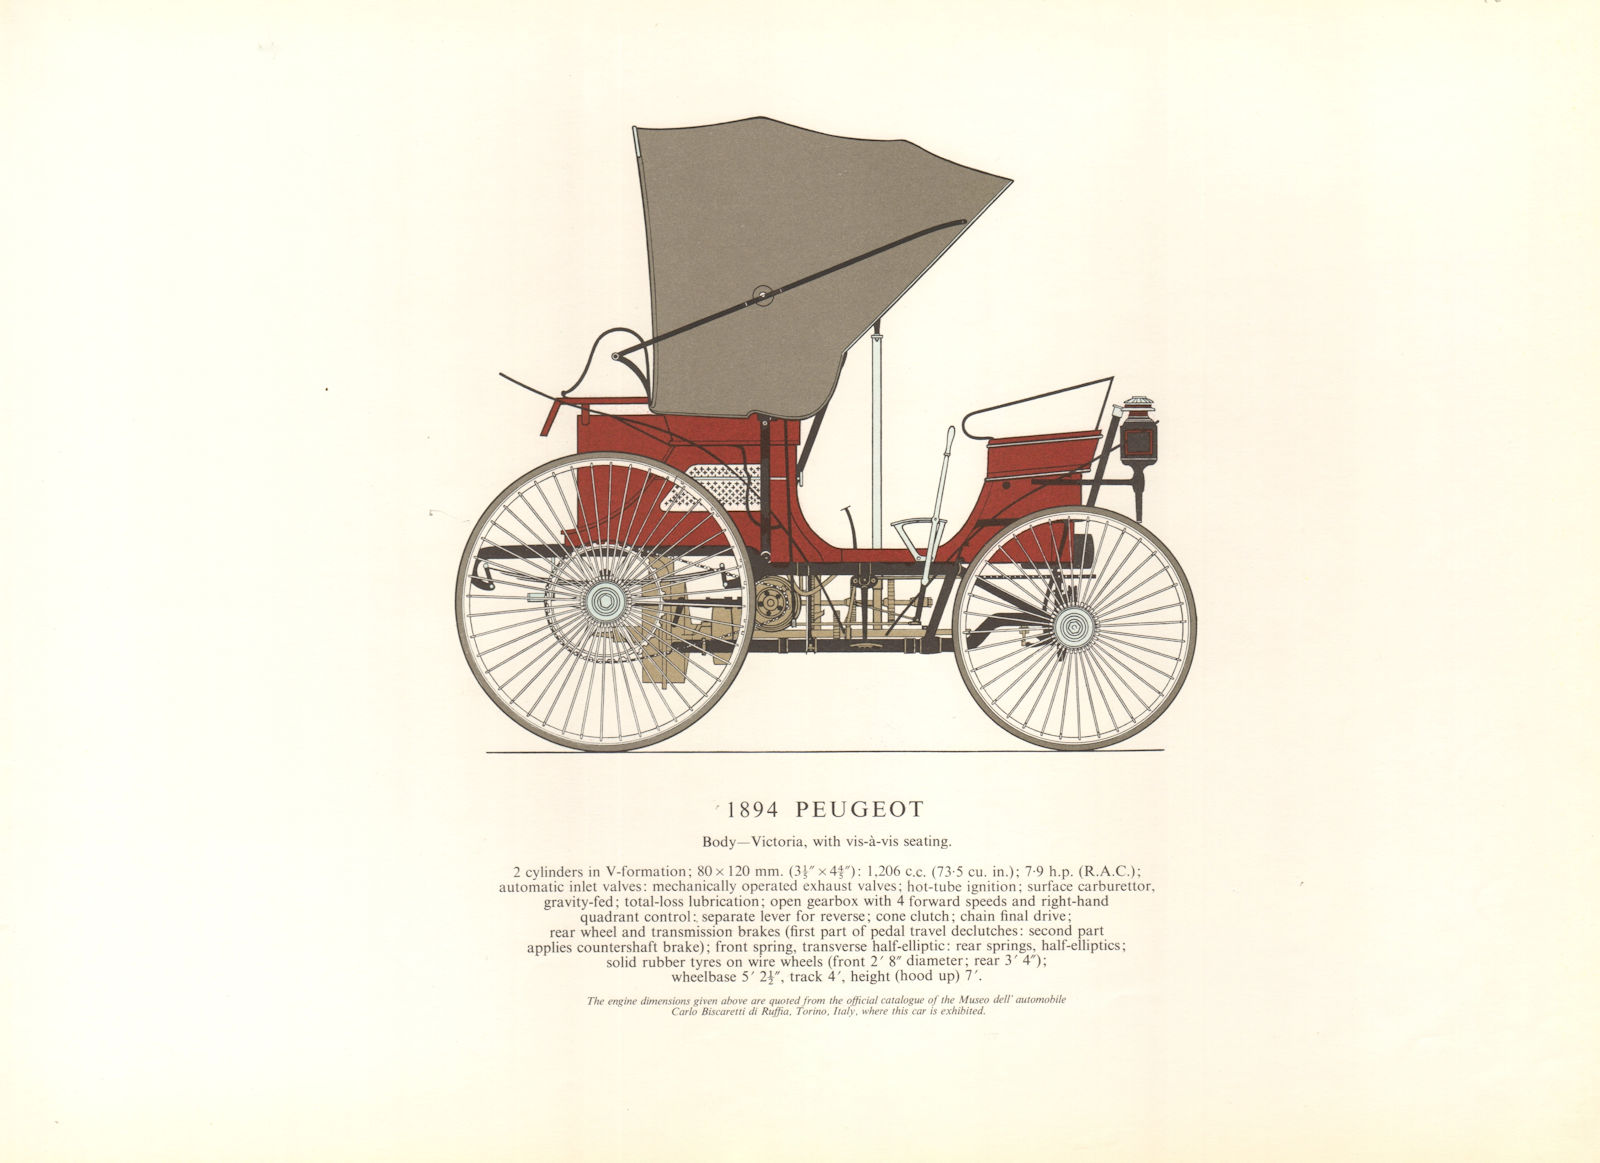 Associate Product Peugeot Victoria (1894) motor car print by George Oliver. France 1966